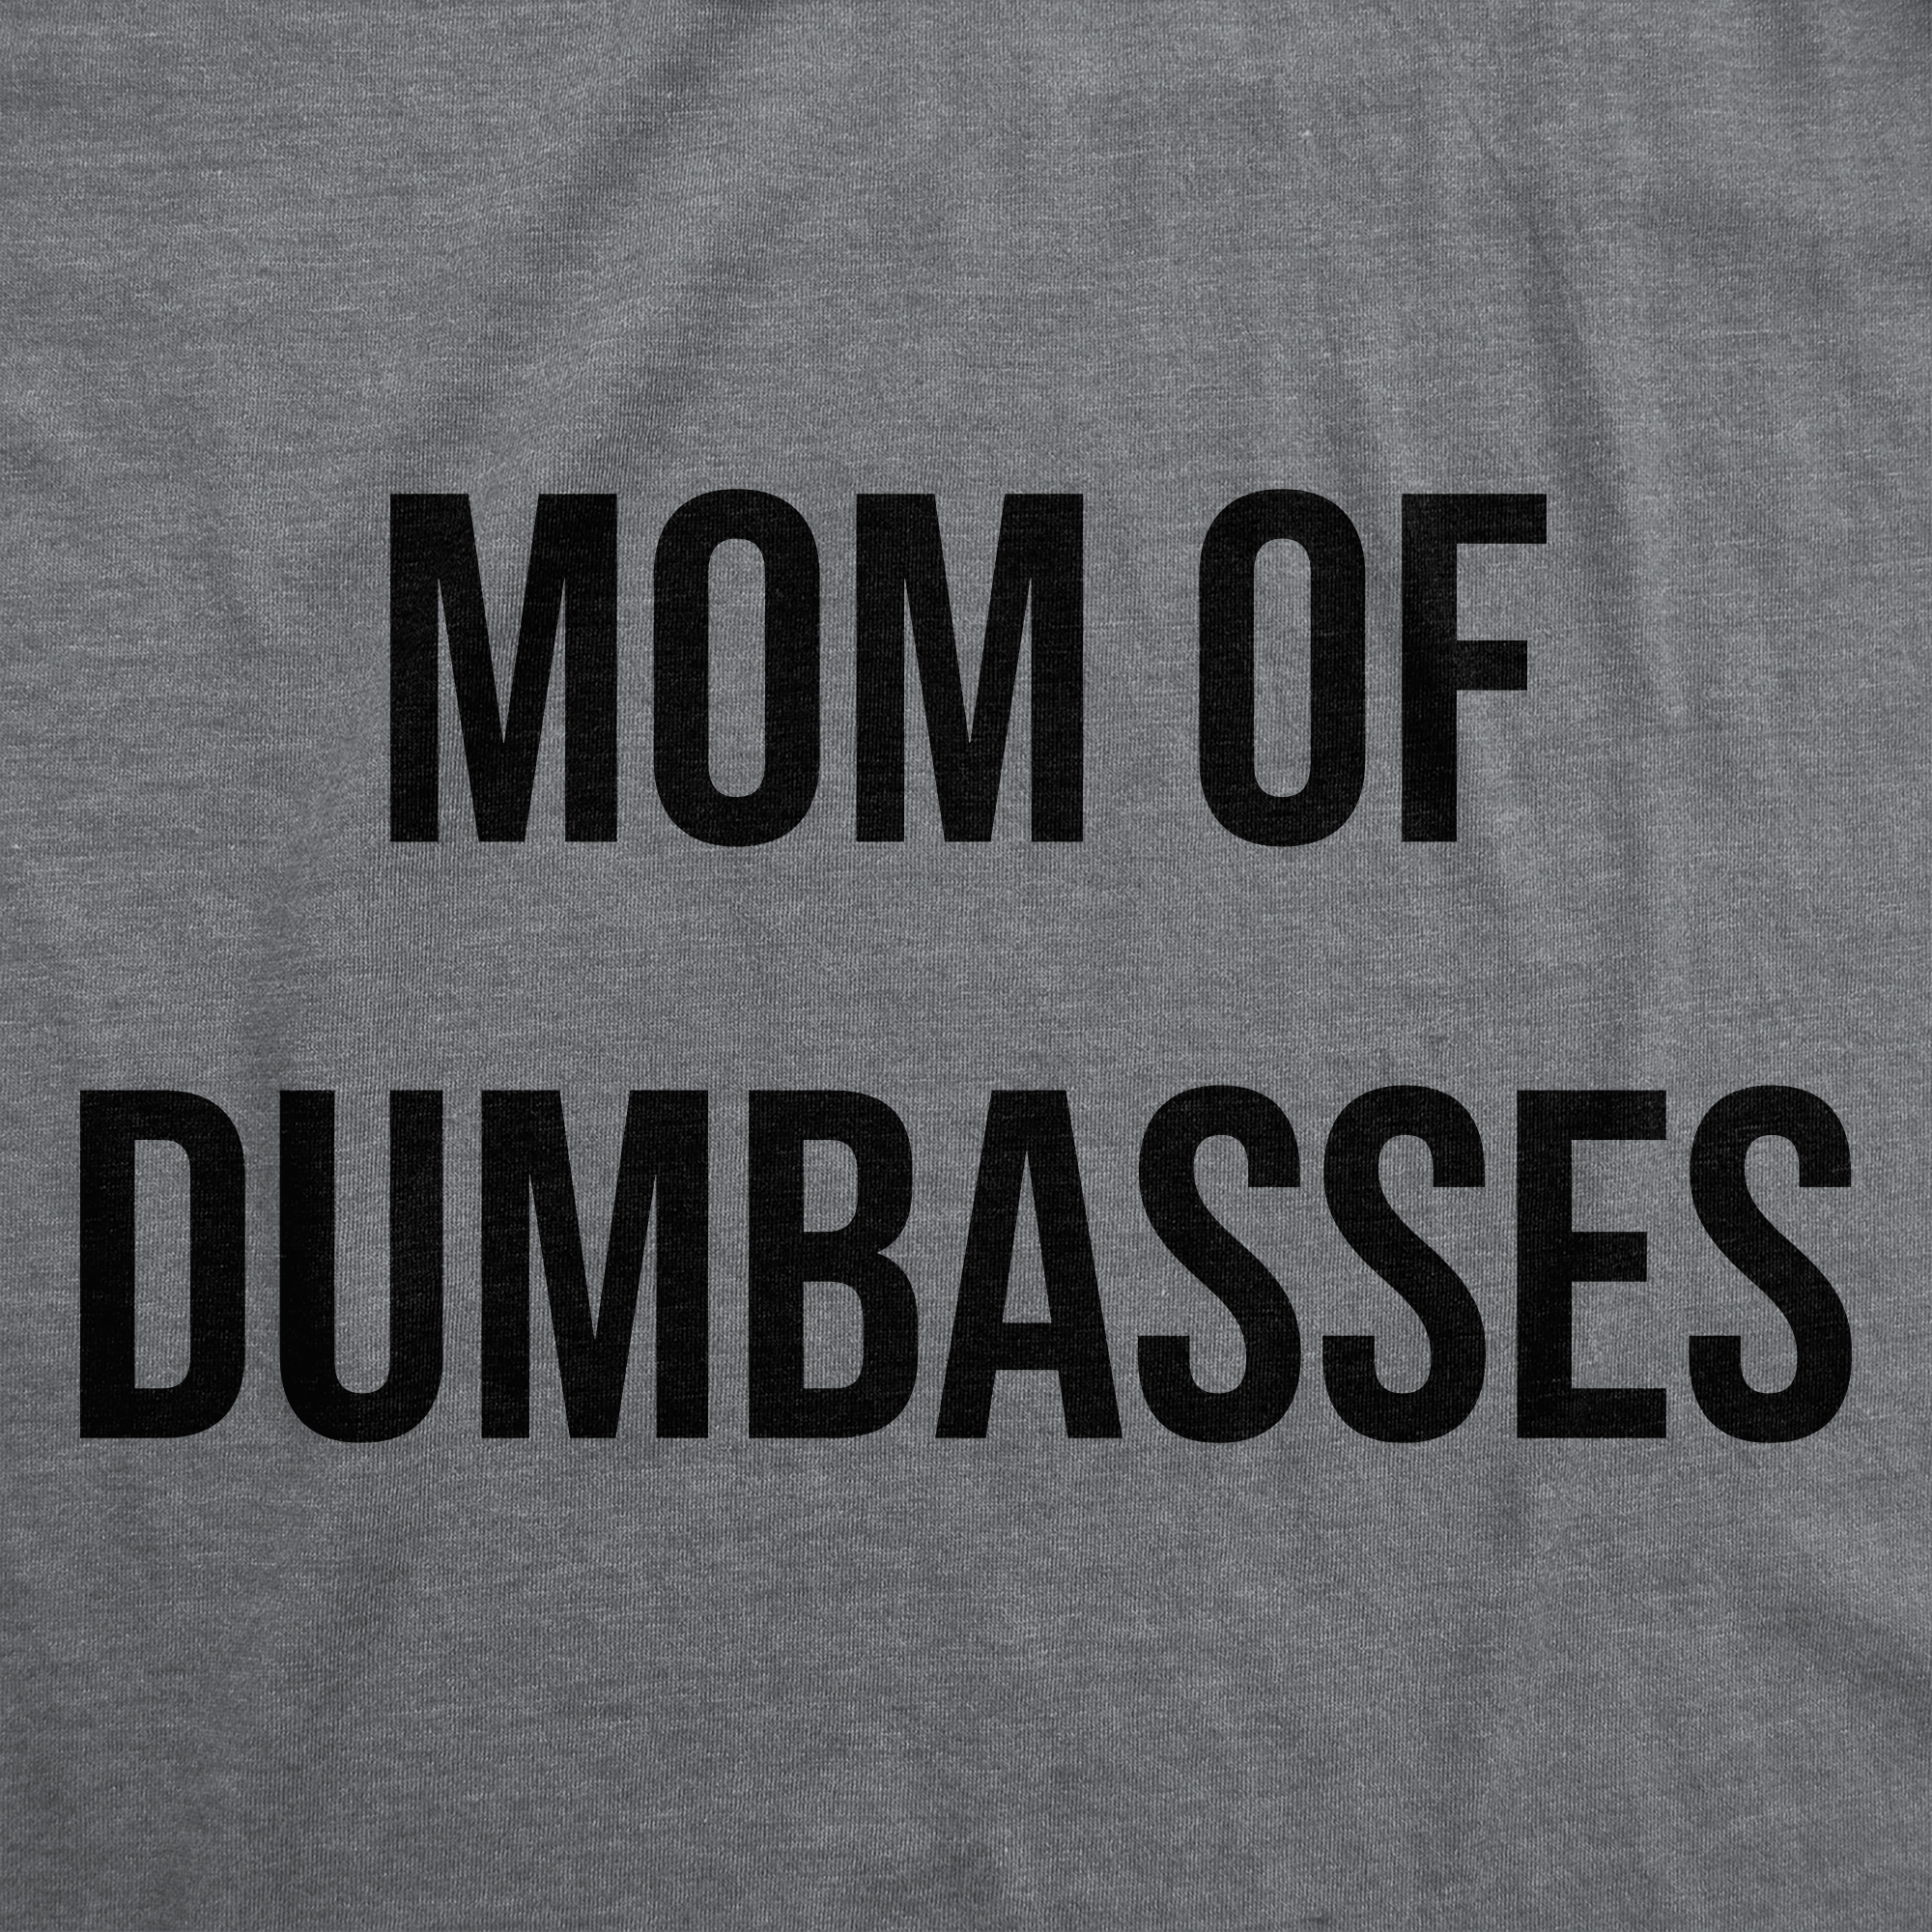 Funny Dark Heather Grey - Mom Of Dumbasses Mom Of Dumbasses Womens T Shirt Nerdy Mother's Day sarcastic Tee